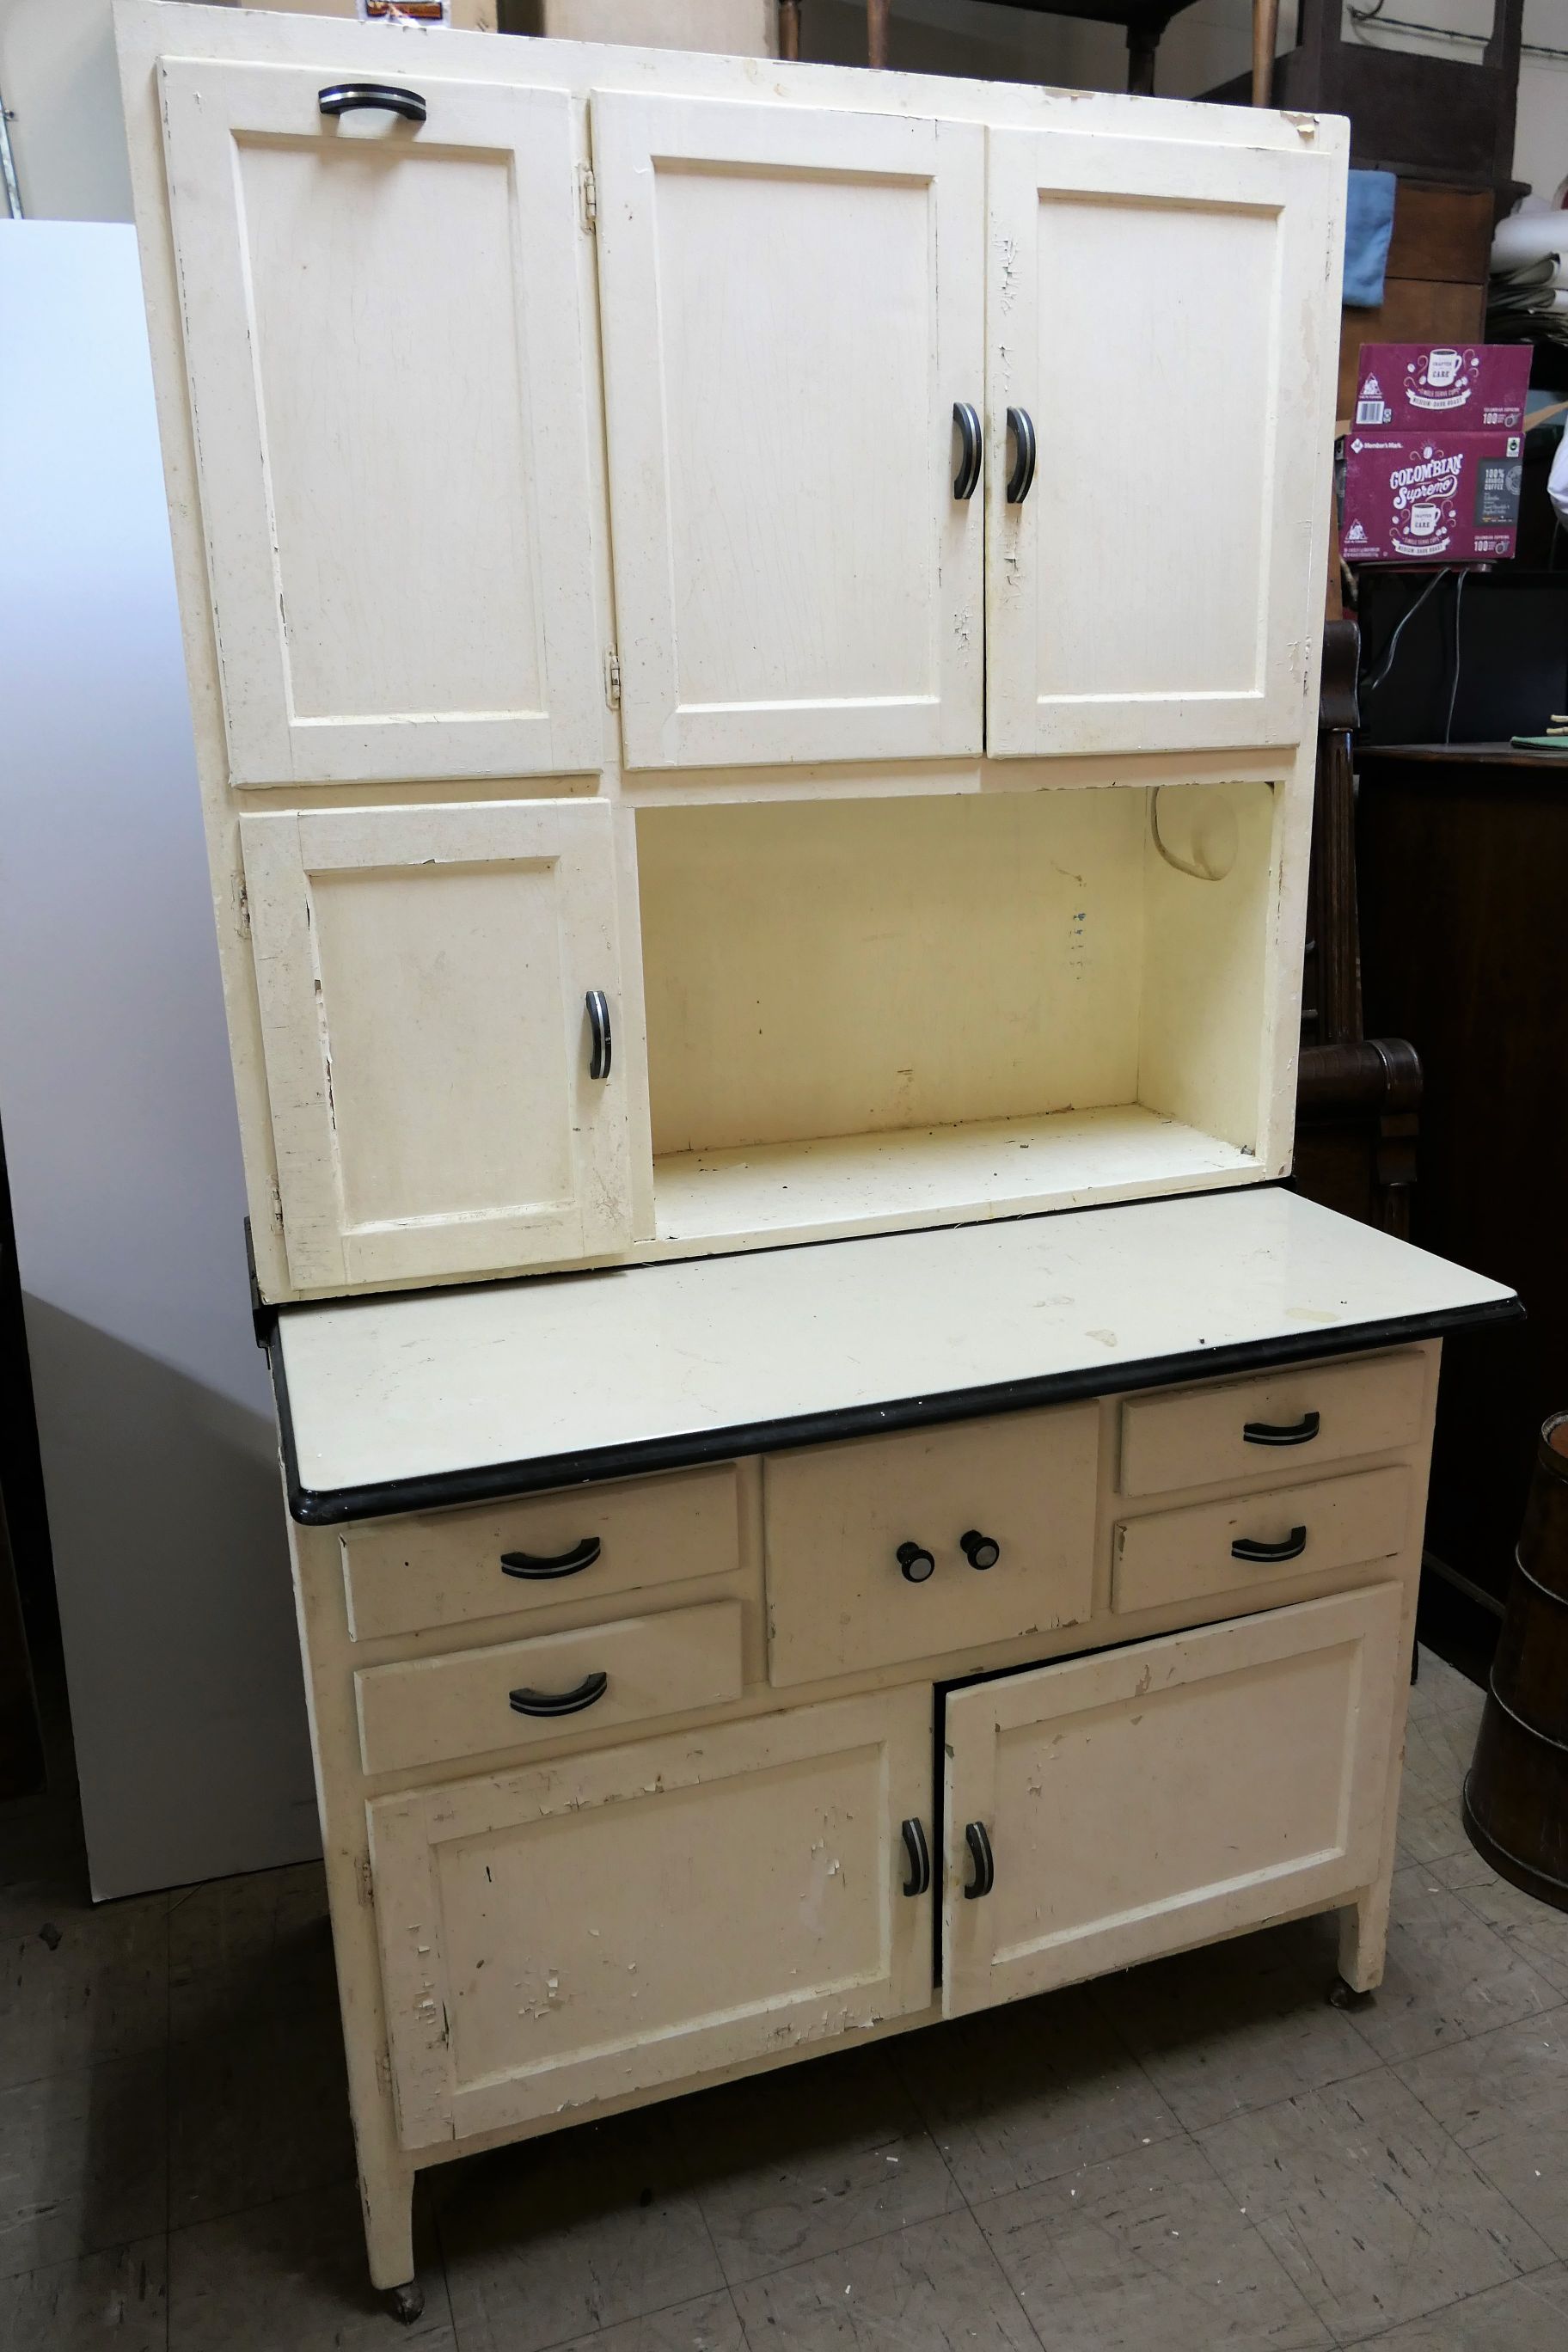 Kitchen Cabinet With Enamel